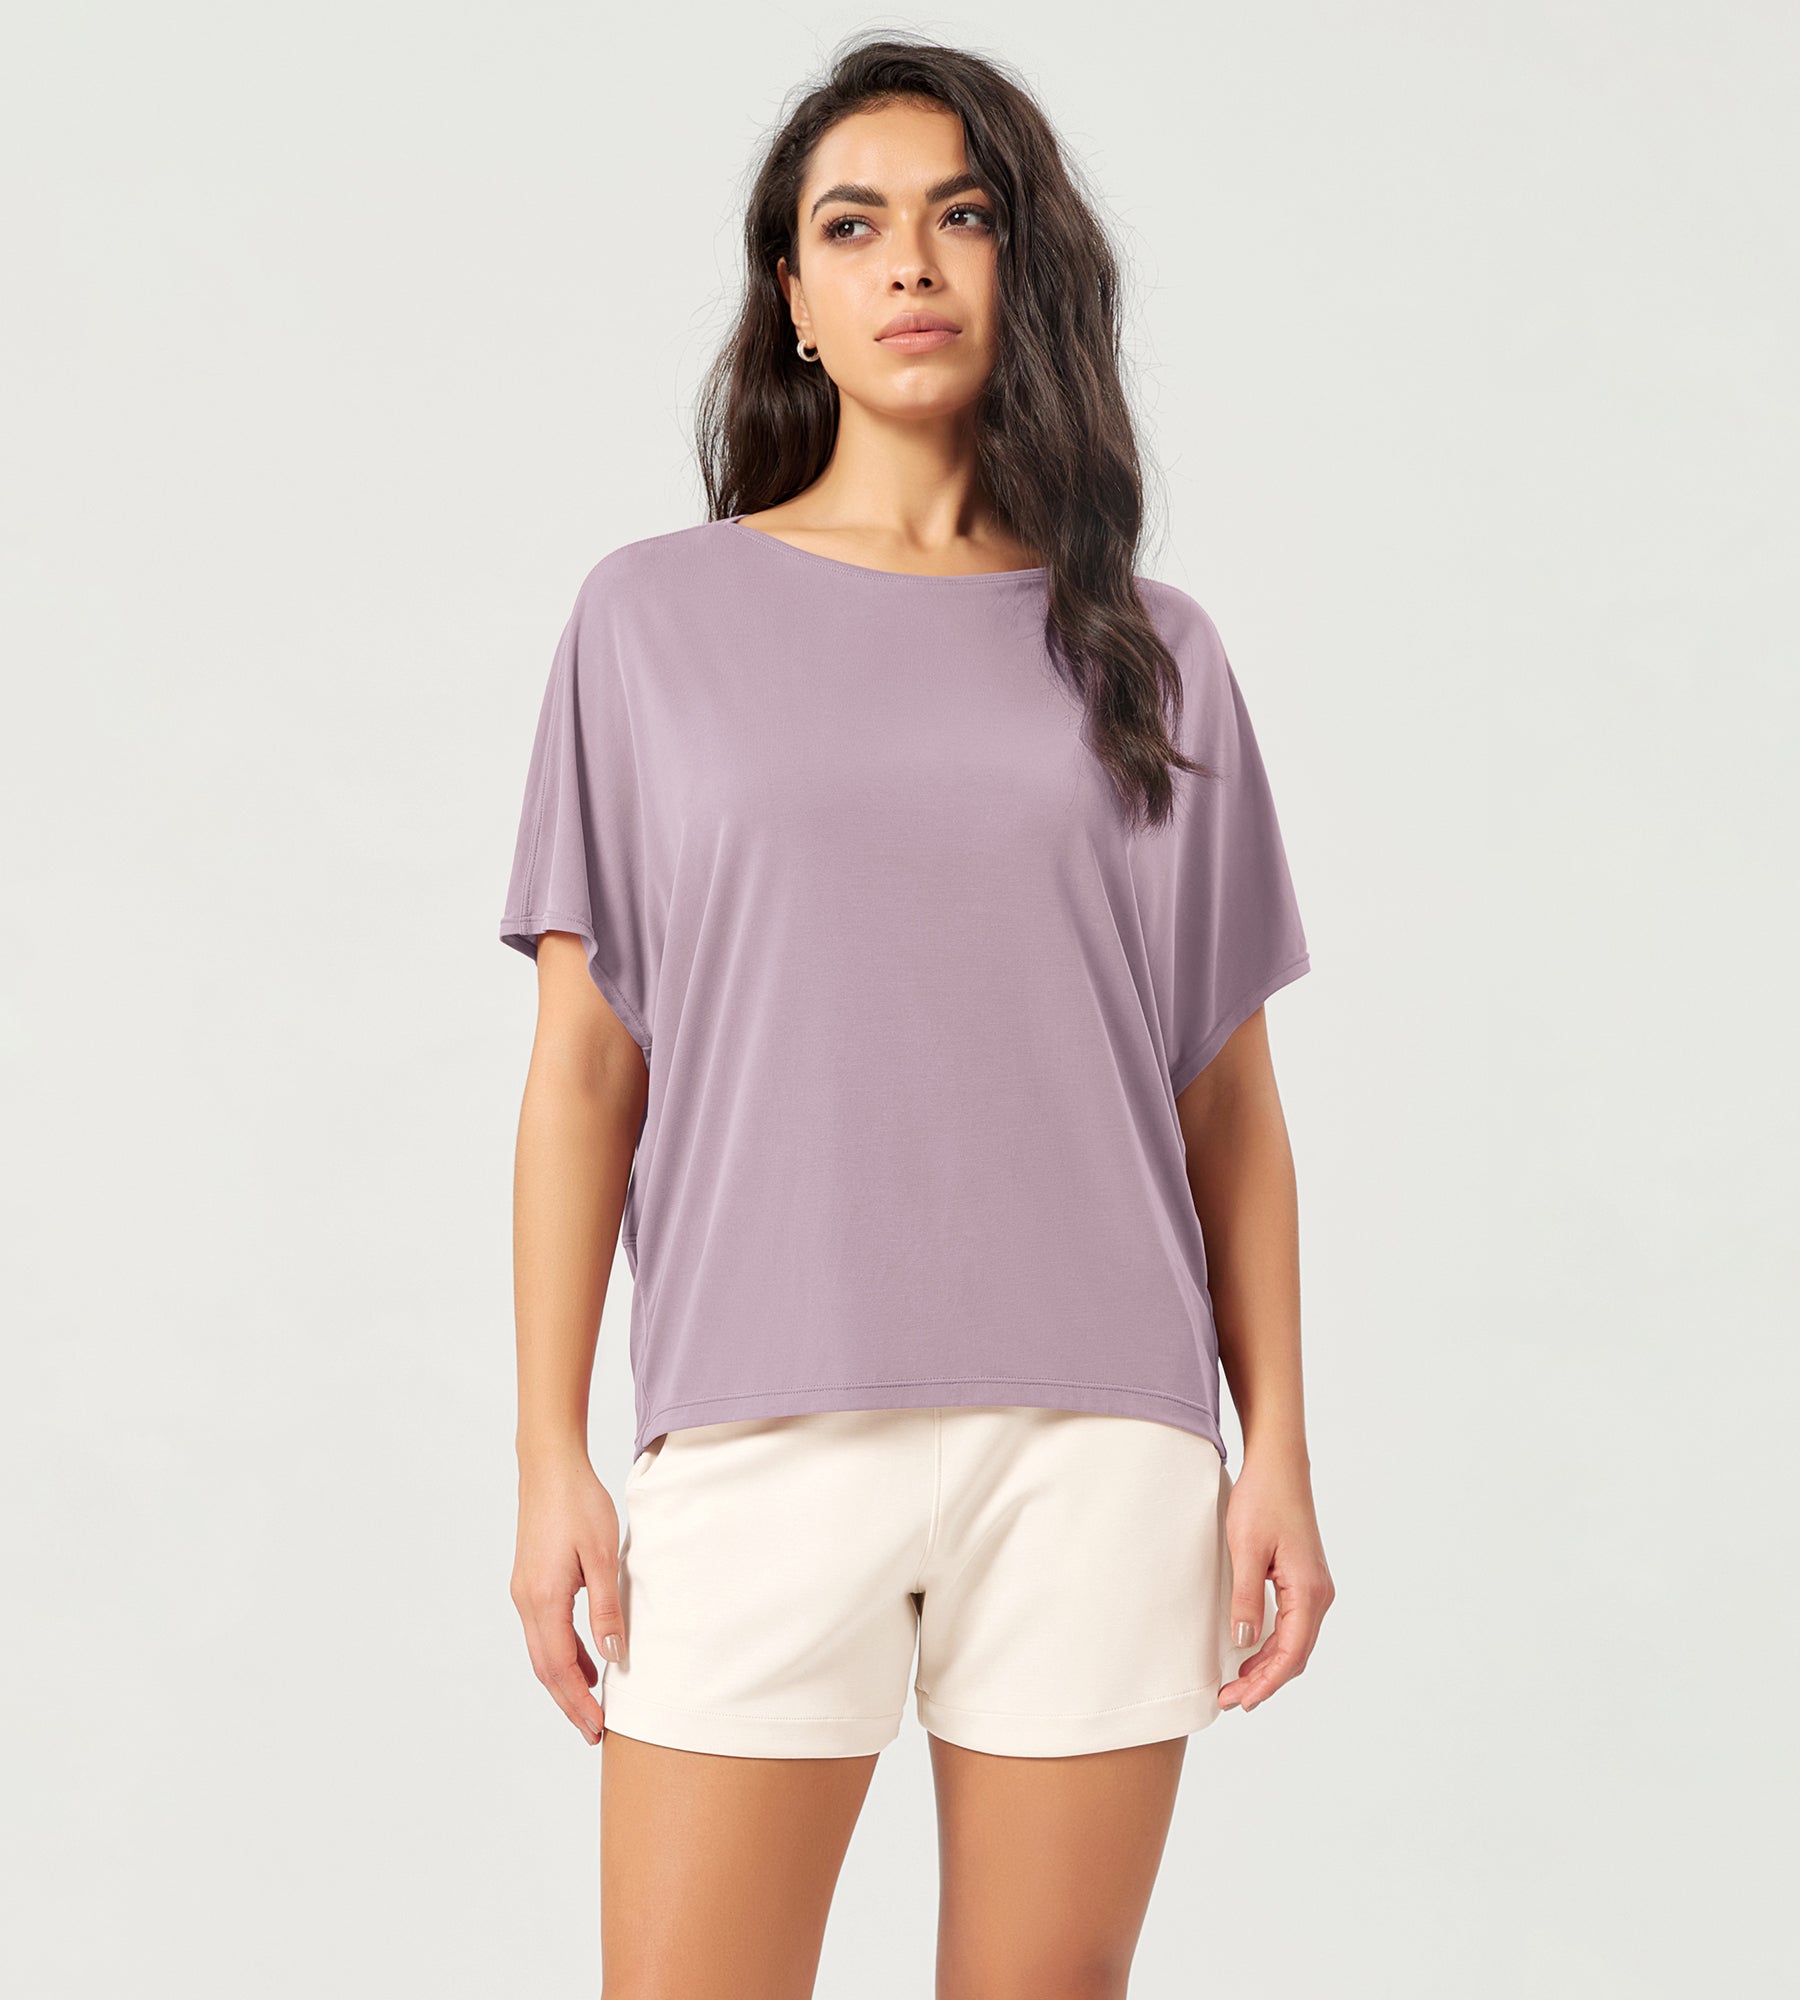 Modal Soft Boat Neck Casual Batwing Tee Shirts - ododos